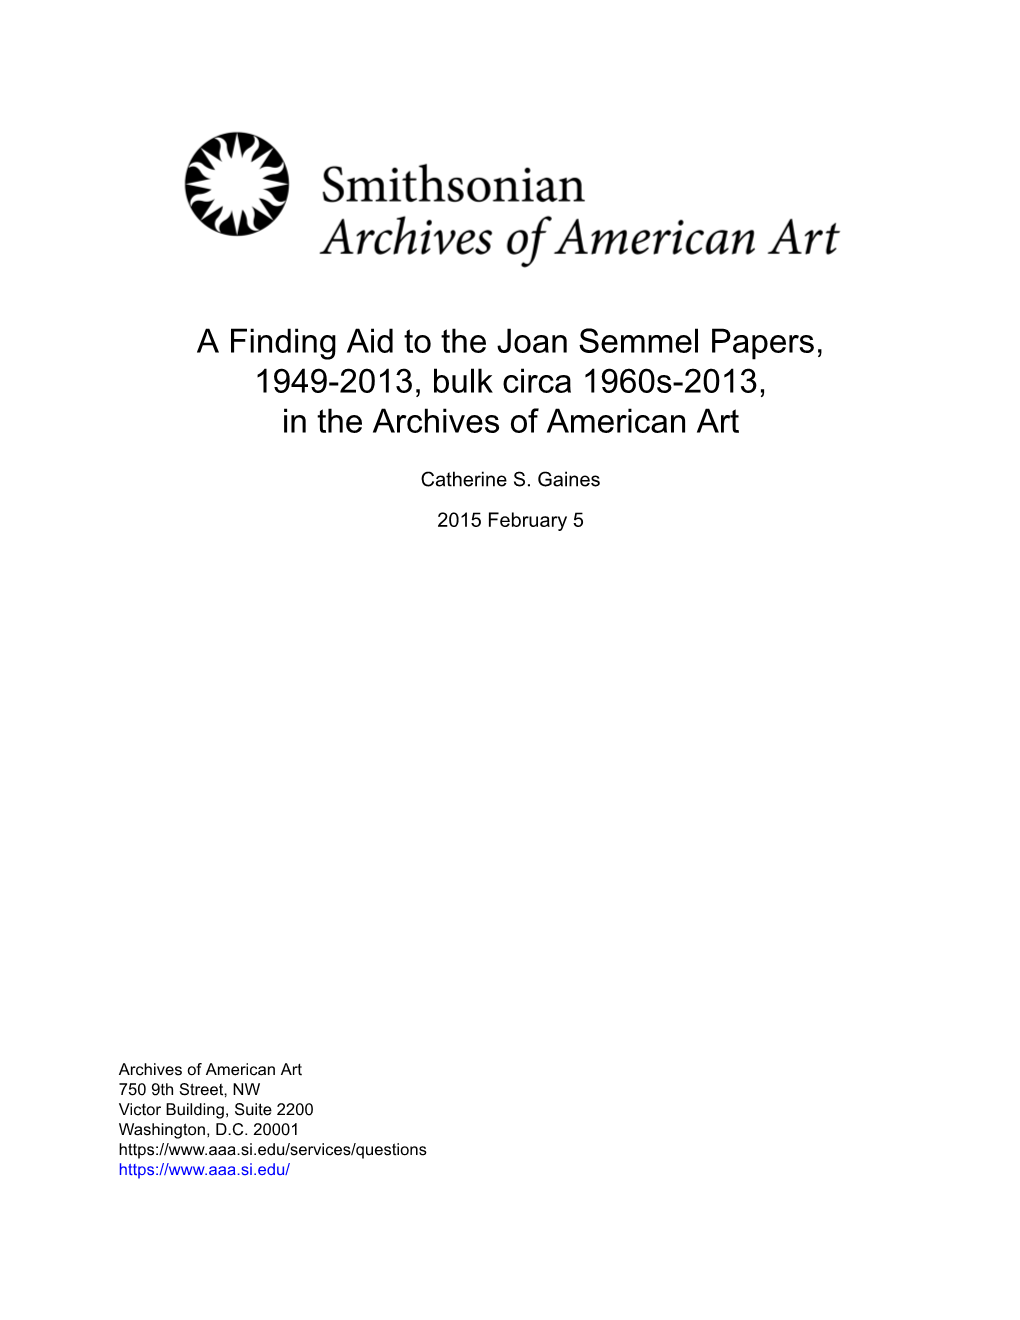 A Finding Aid to the Joan Semmel Papers, 1949-2013, Bulk Circa 1960S-2013, in the Archives of American Art